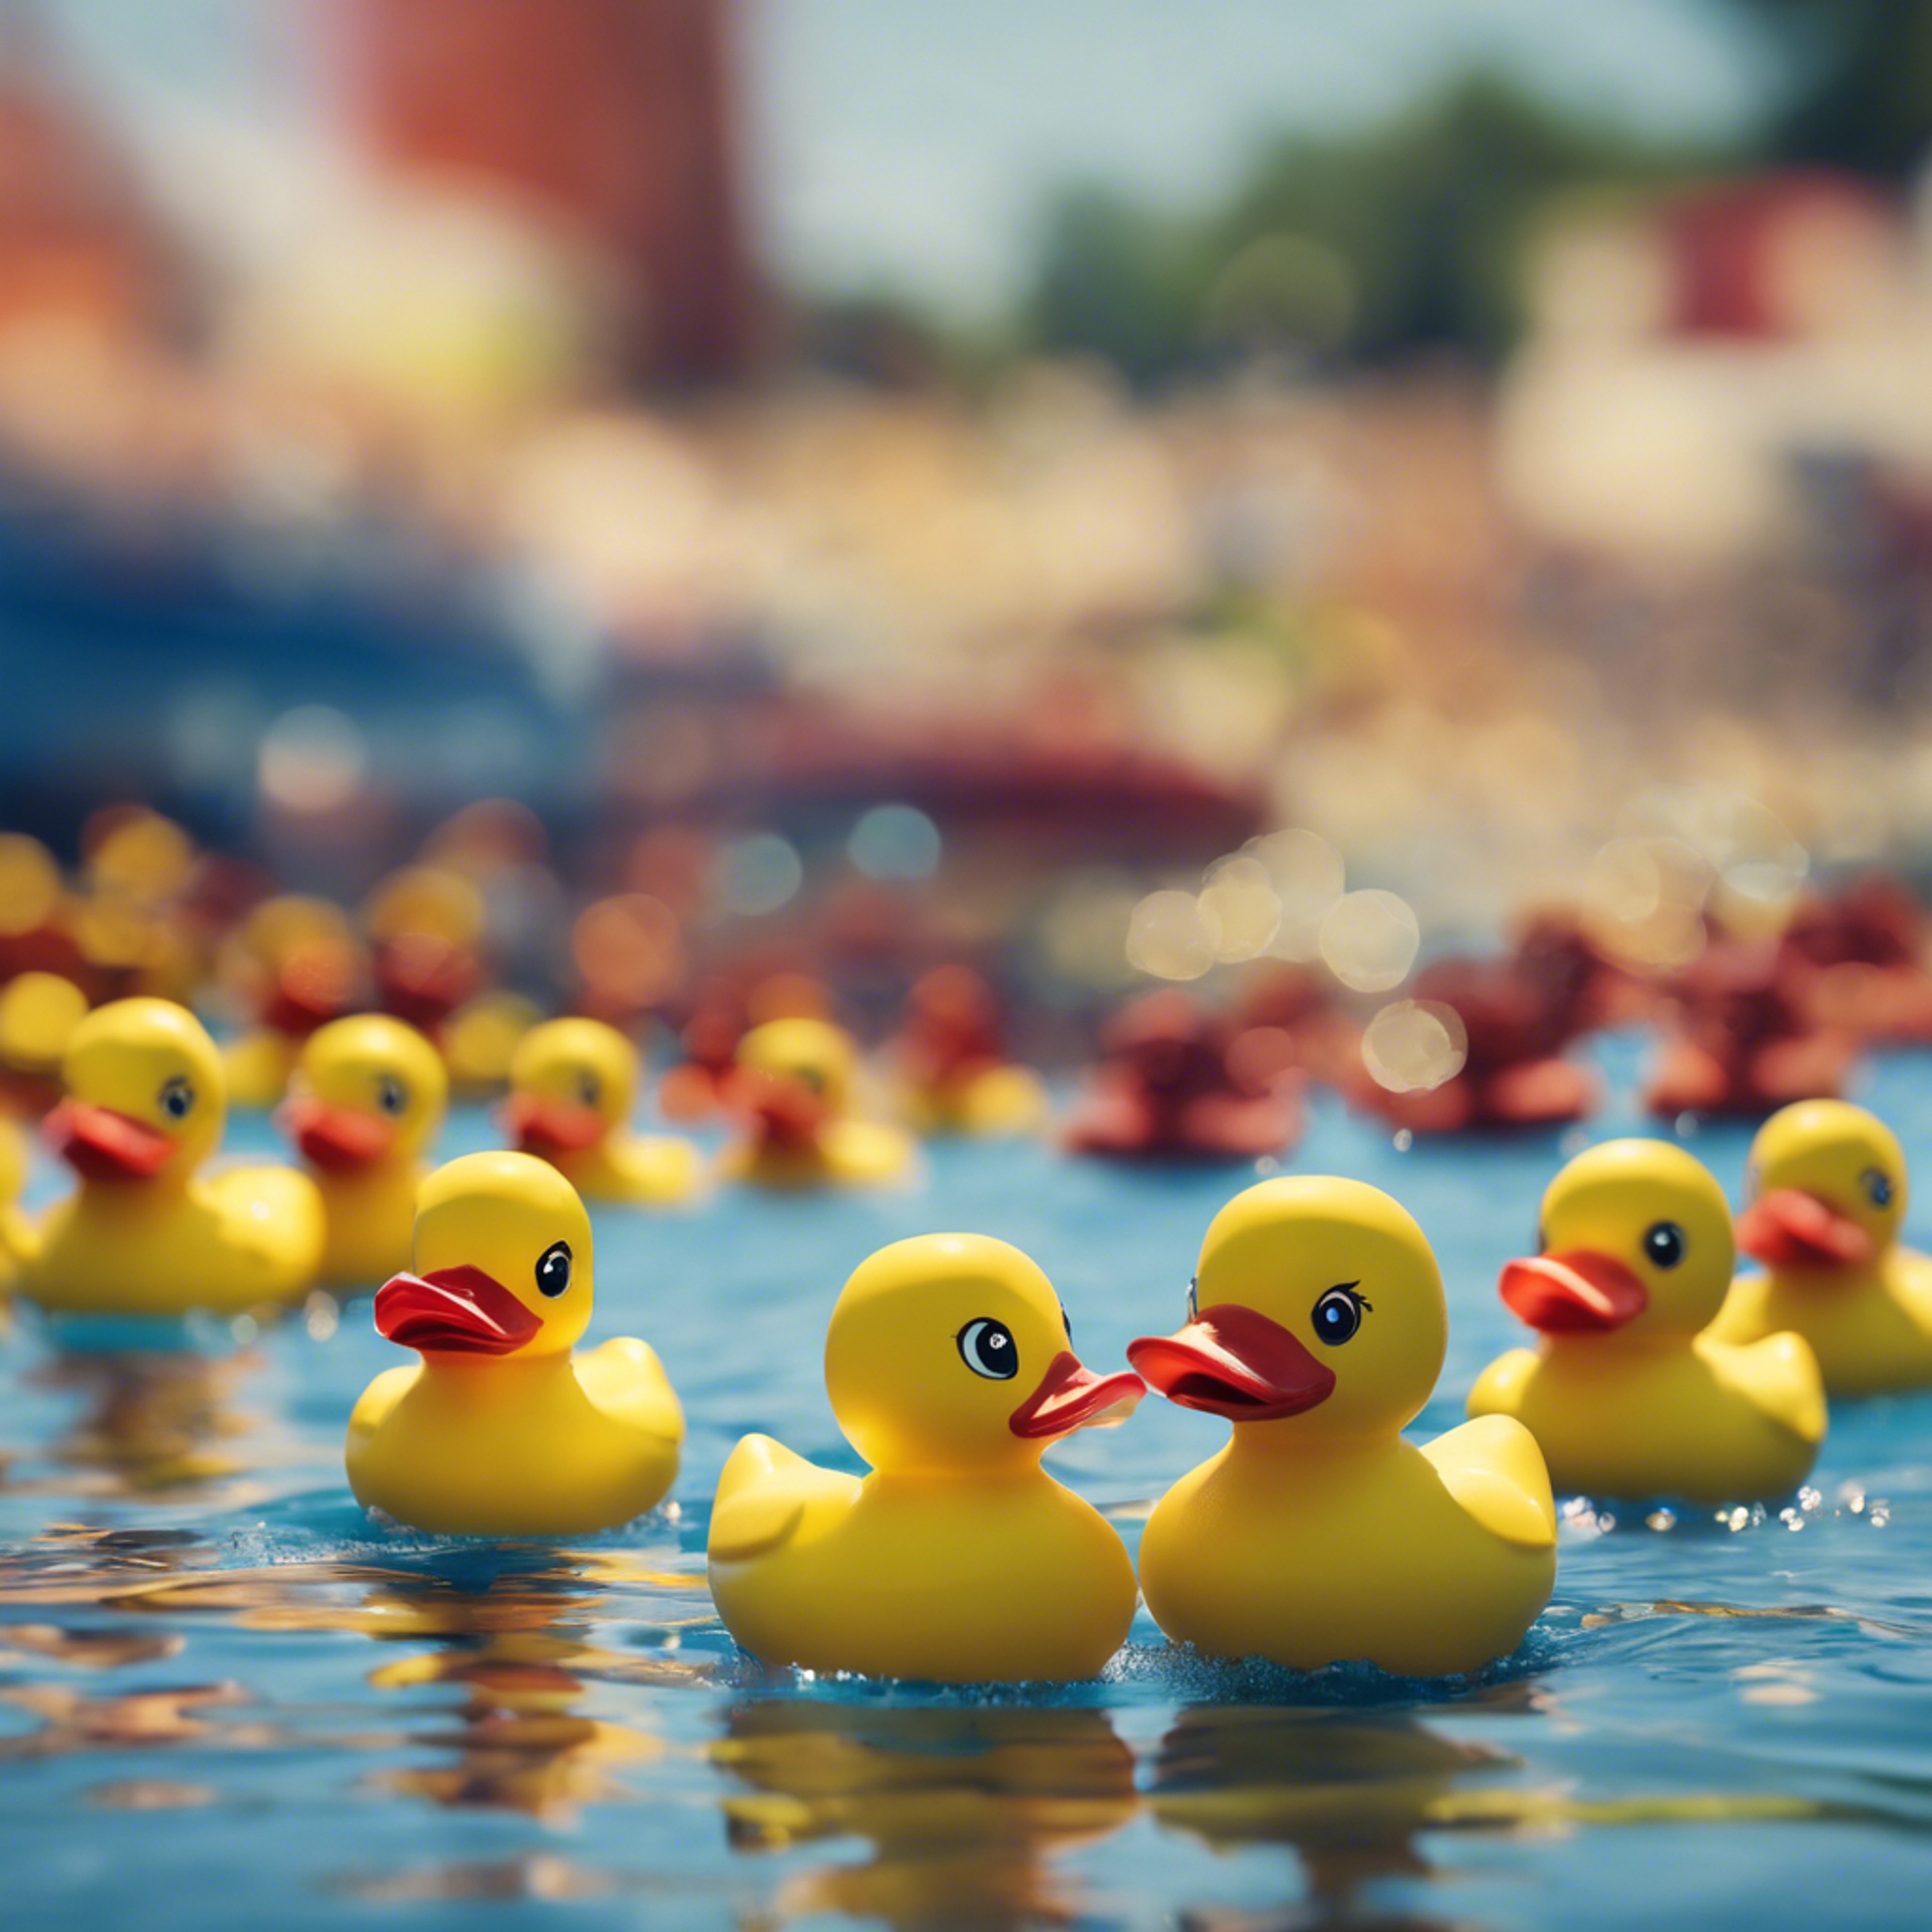 A team of vibrant rubber ducks lined up for a fun bath-time race. 墙纸[f8bfe643527940e89331]